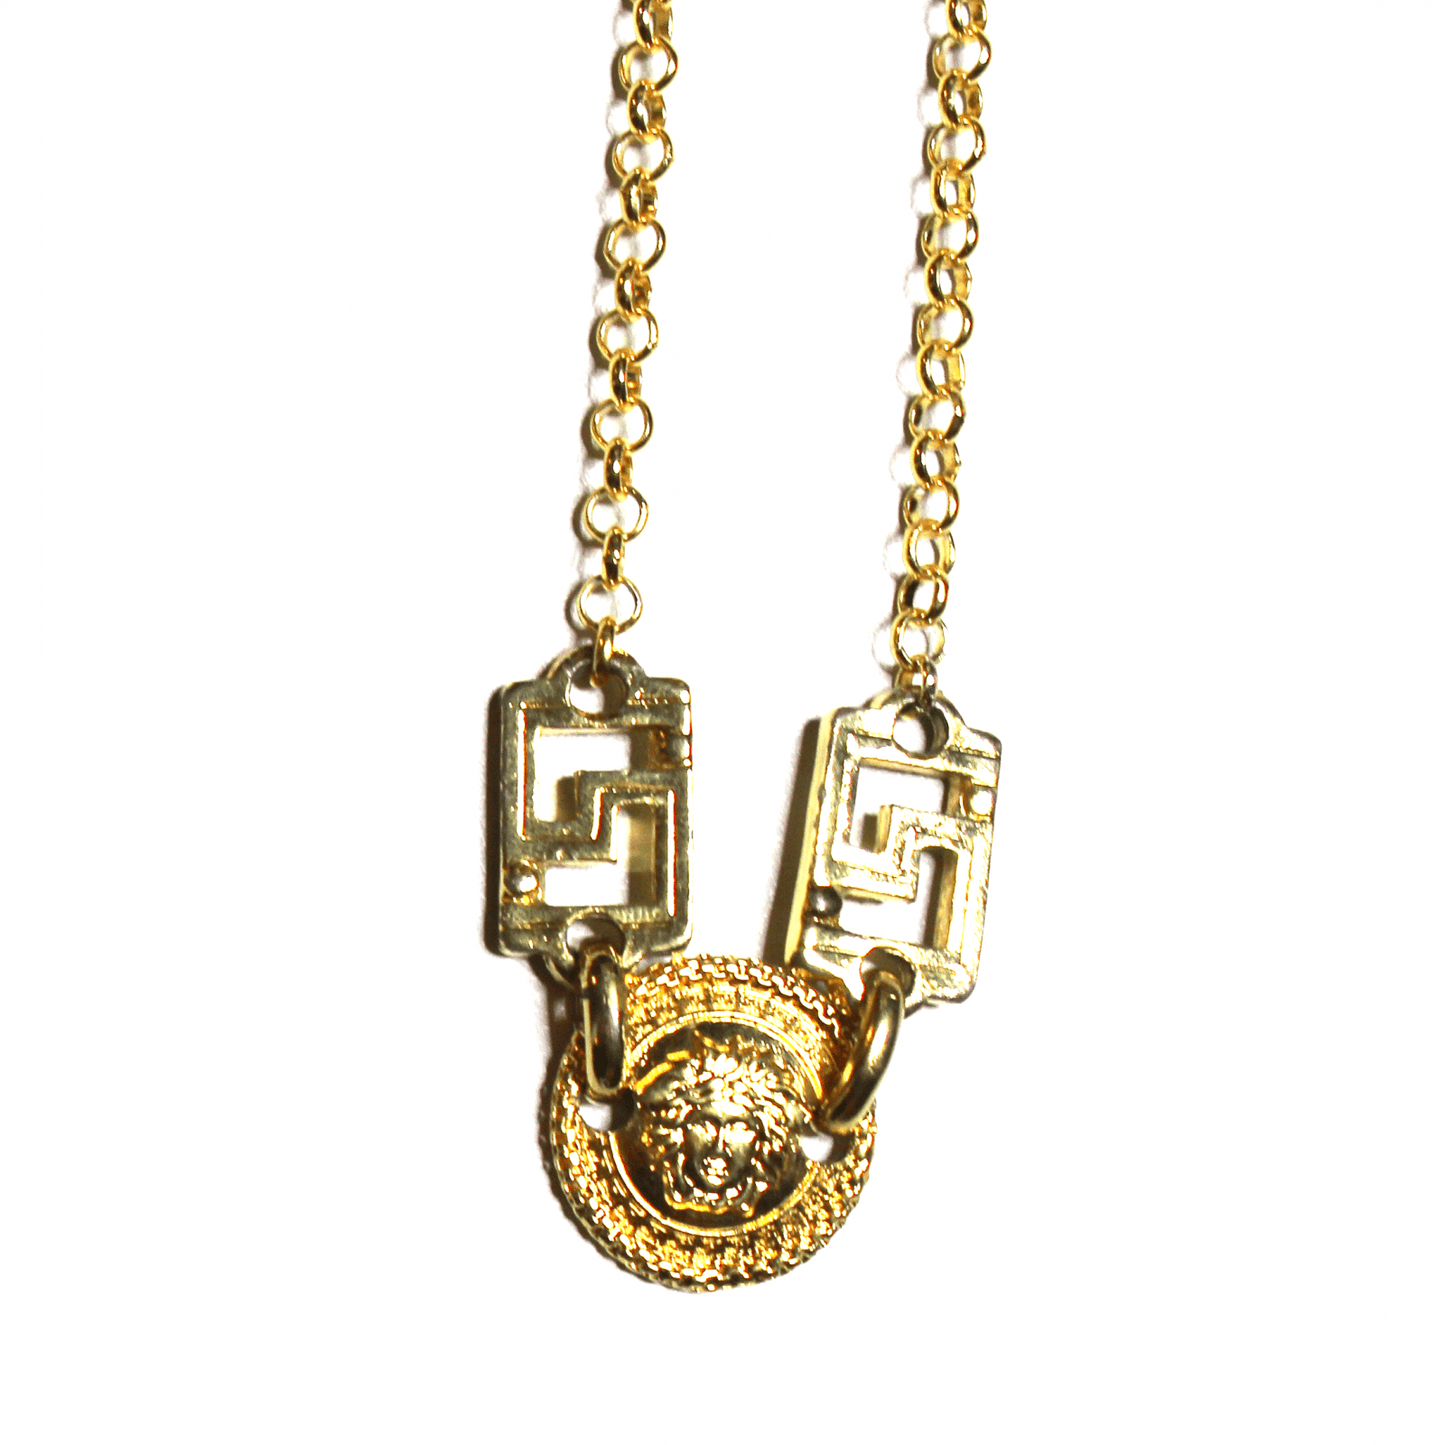 Small Gold Gianni Versace Single Sided Medusa Head Coin Chain with Greek Key Accents RSTKD Vintage